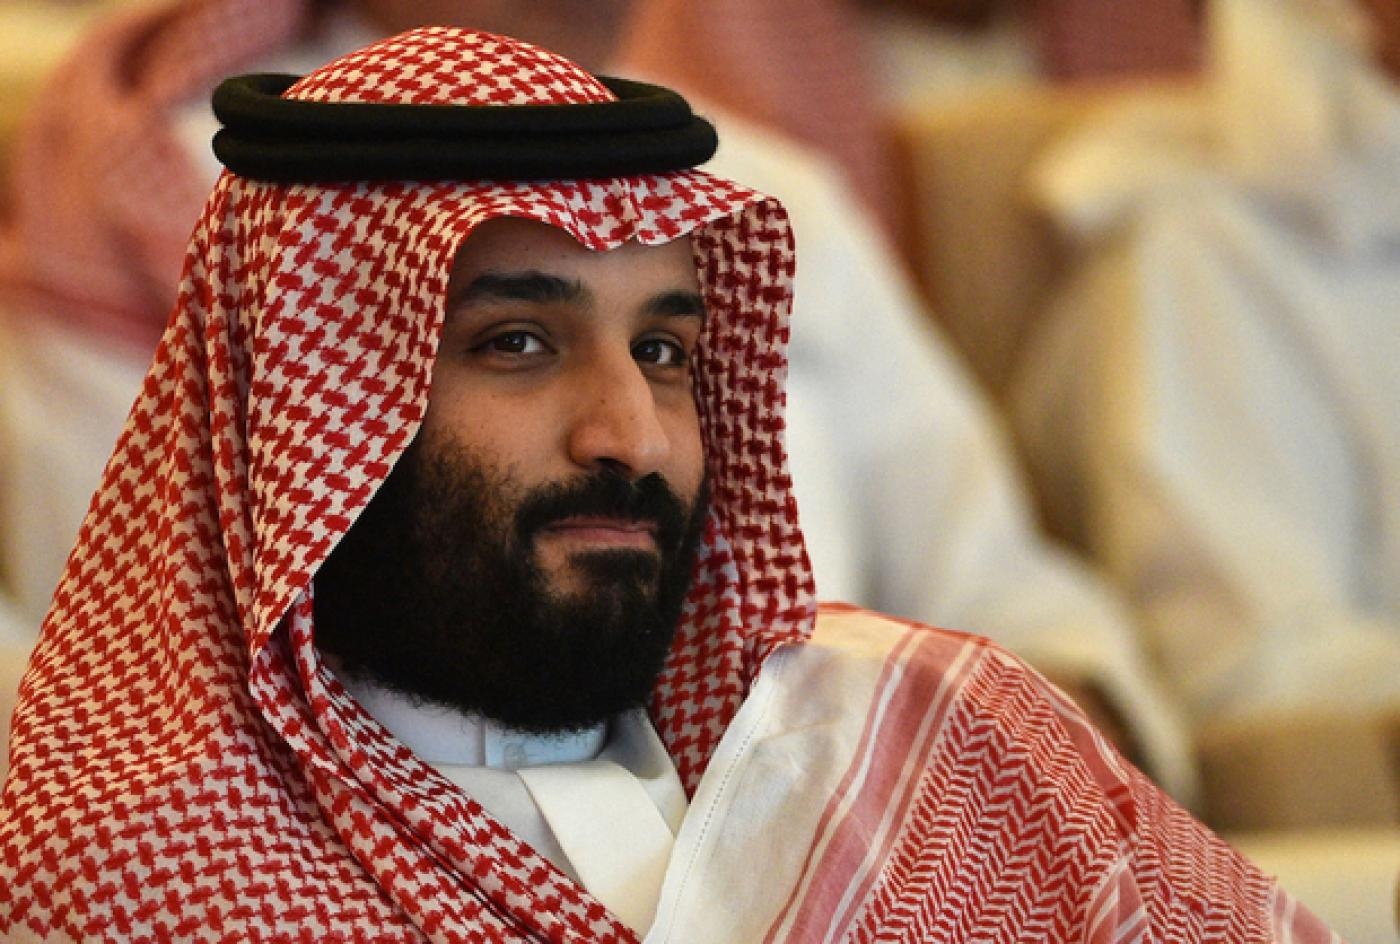 MBS is accused of sending a 50-person kill team to Canada